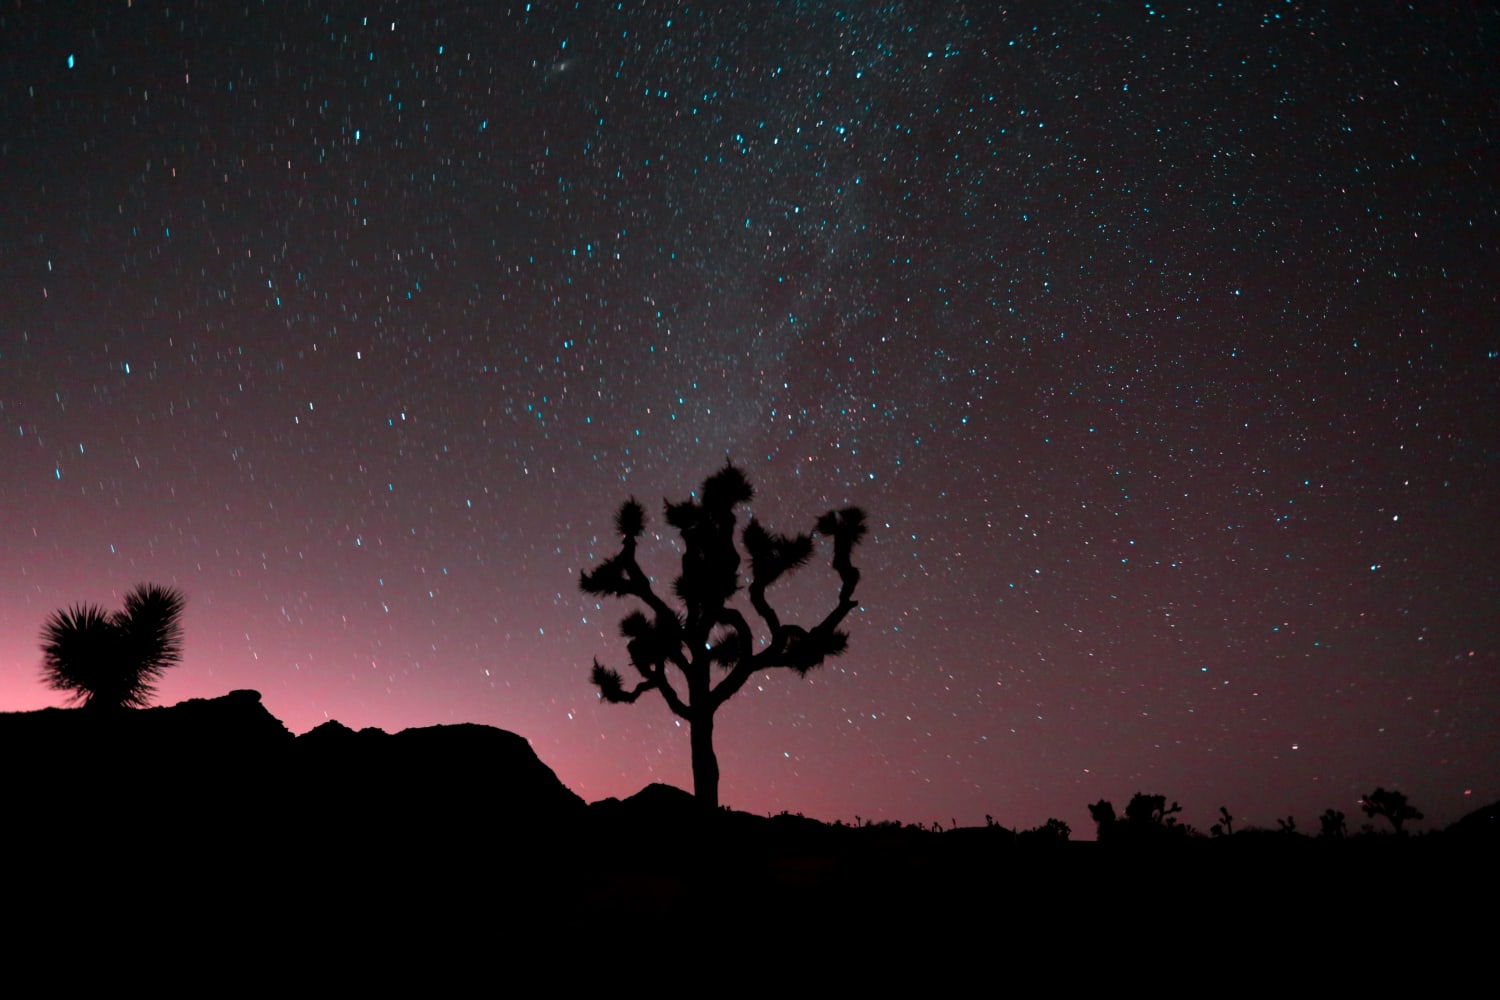 Joshua Tree California | 30 seconds at 12 PM with Los Angeles Light in the Background.